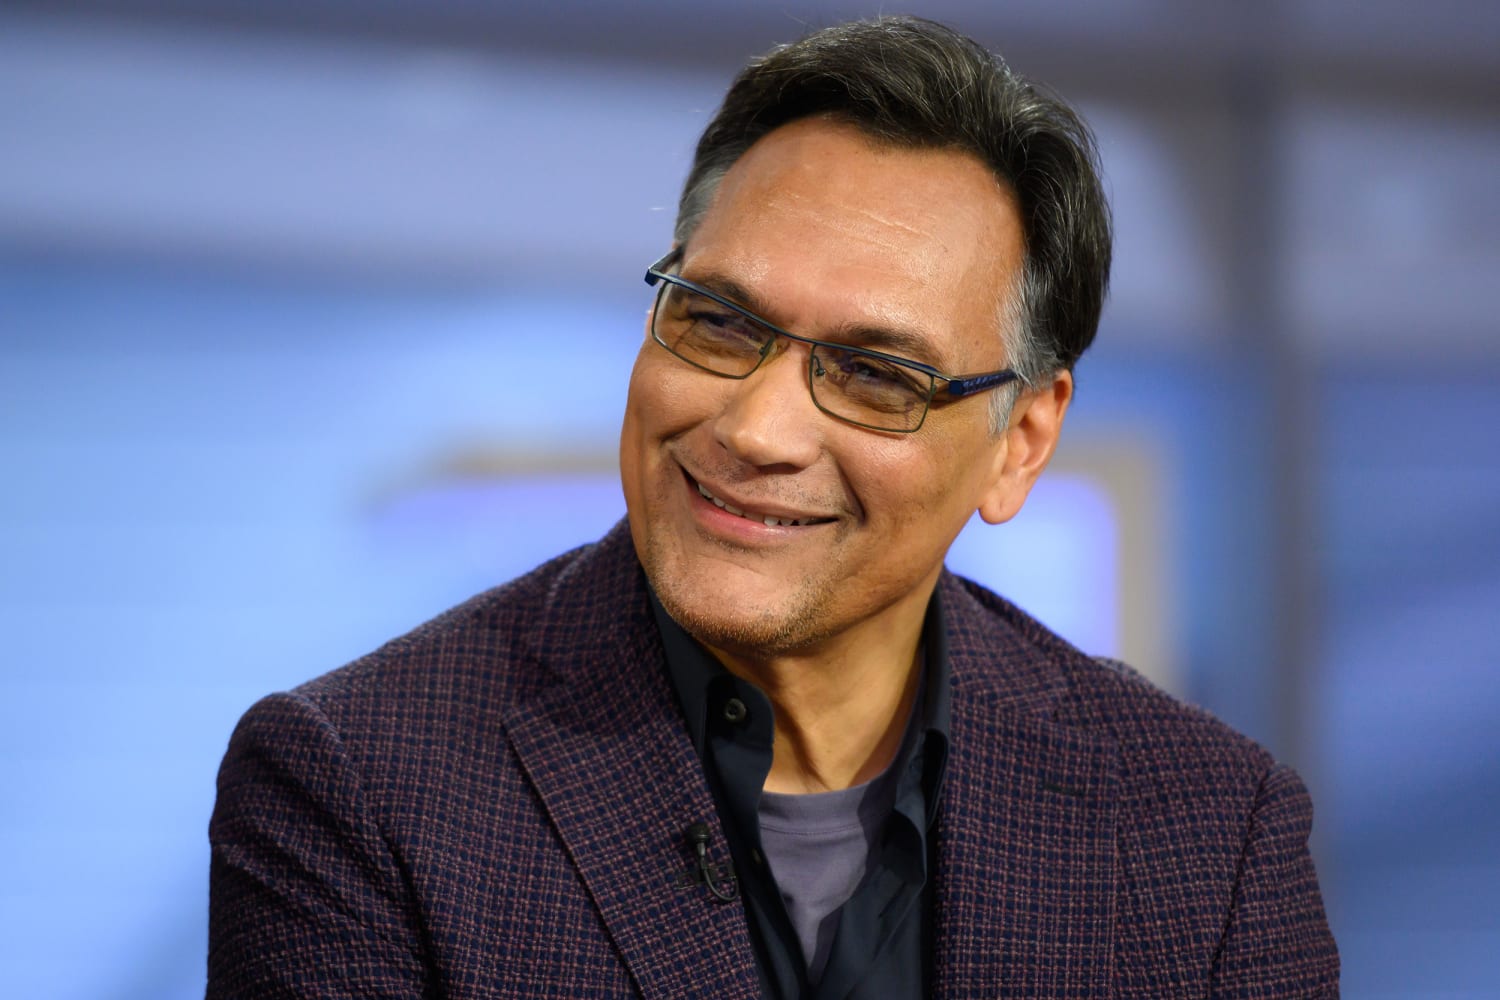 Actor Jimmy Smits gets a star on the Hollywood Walk of Fame